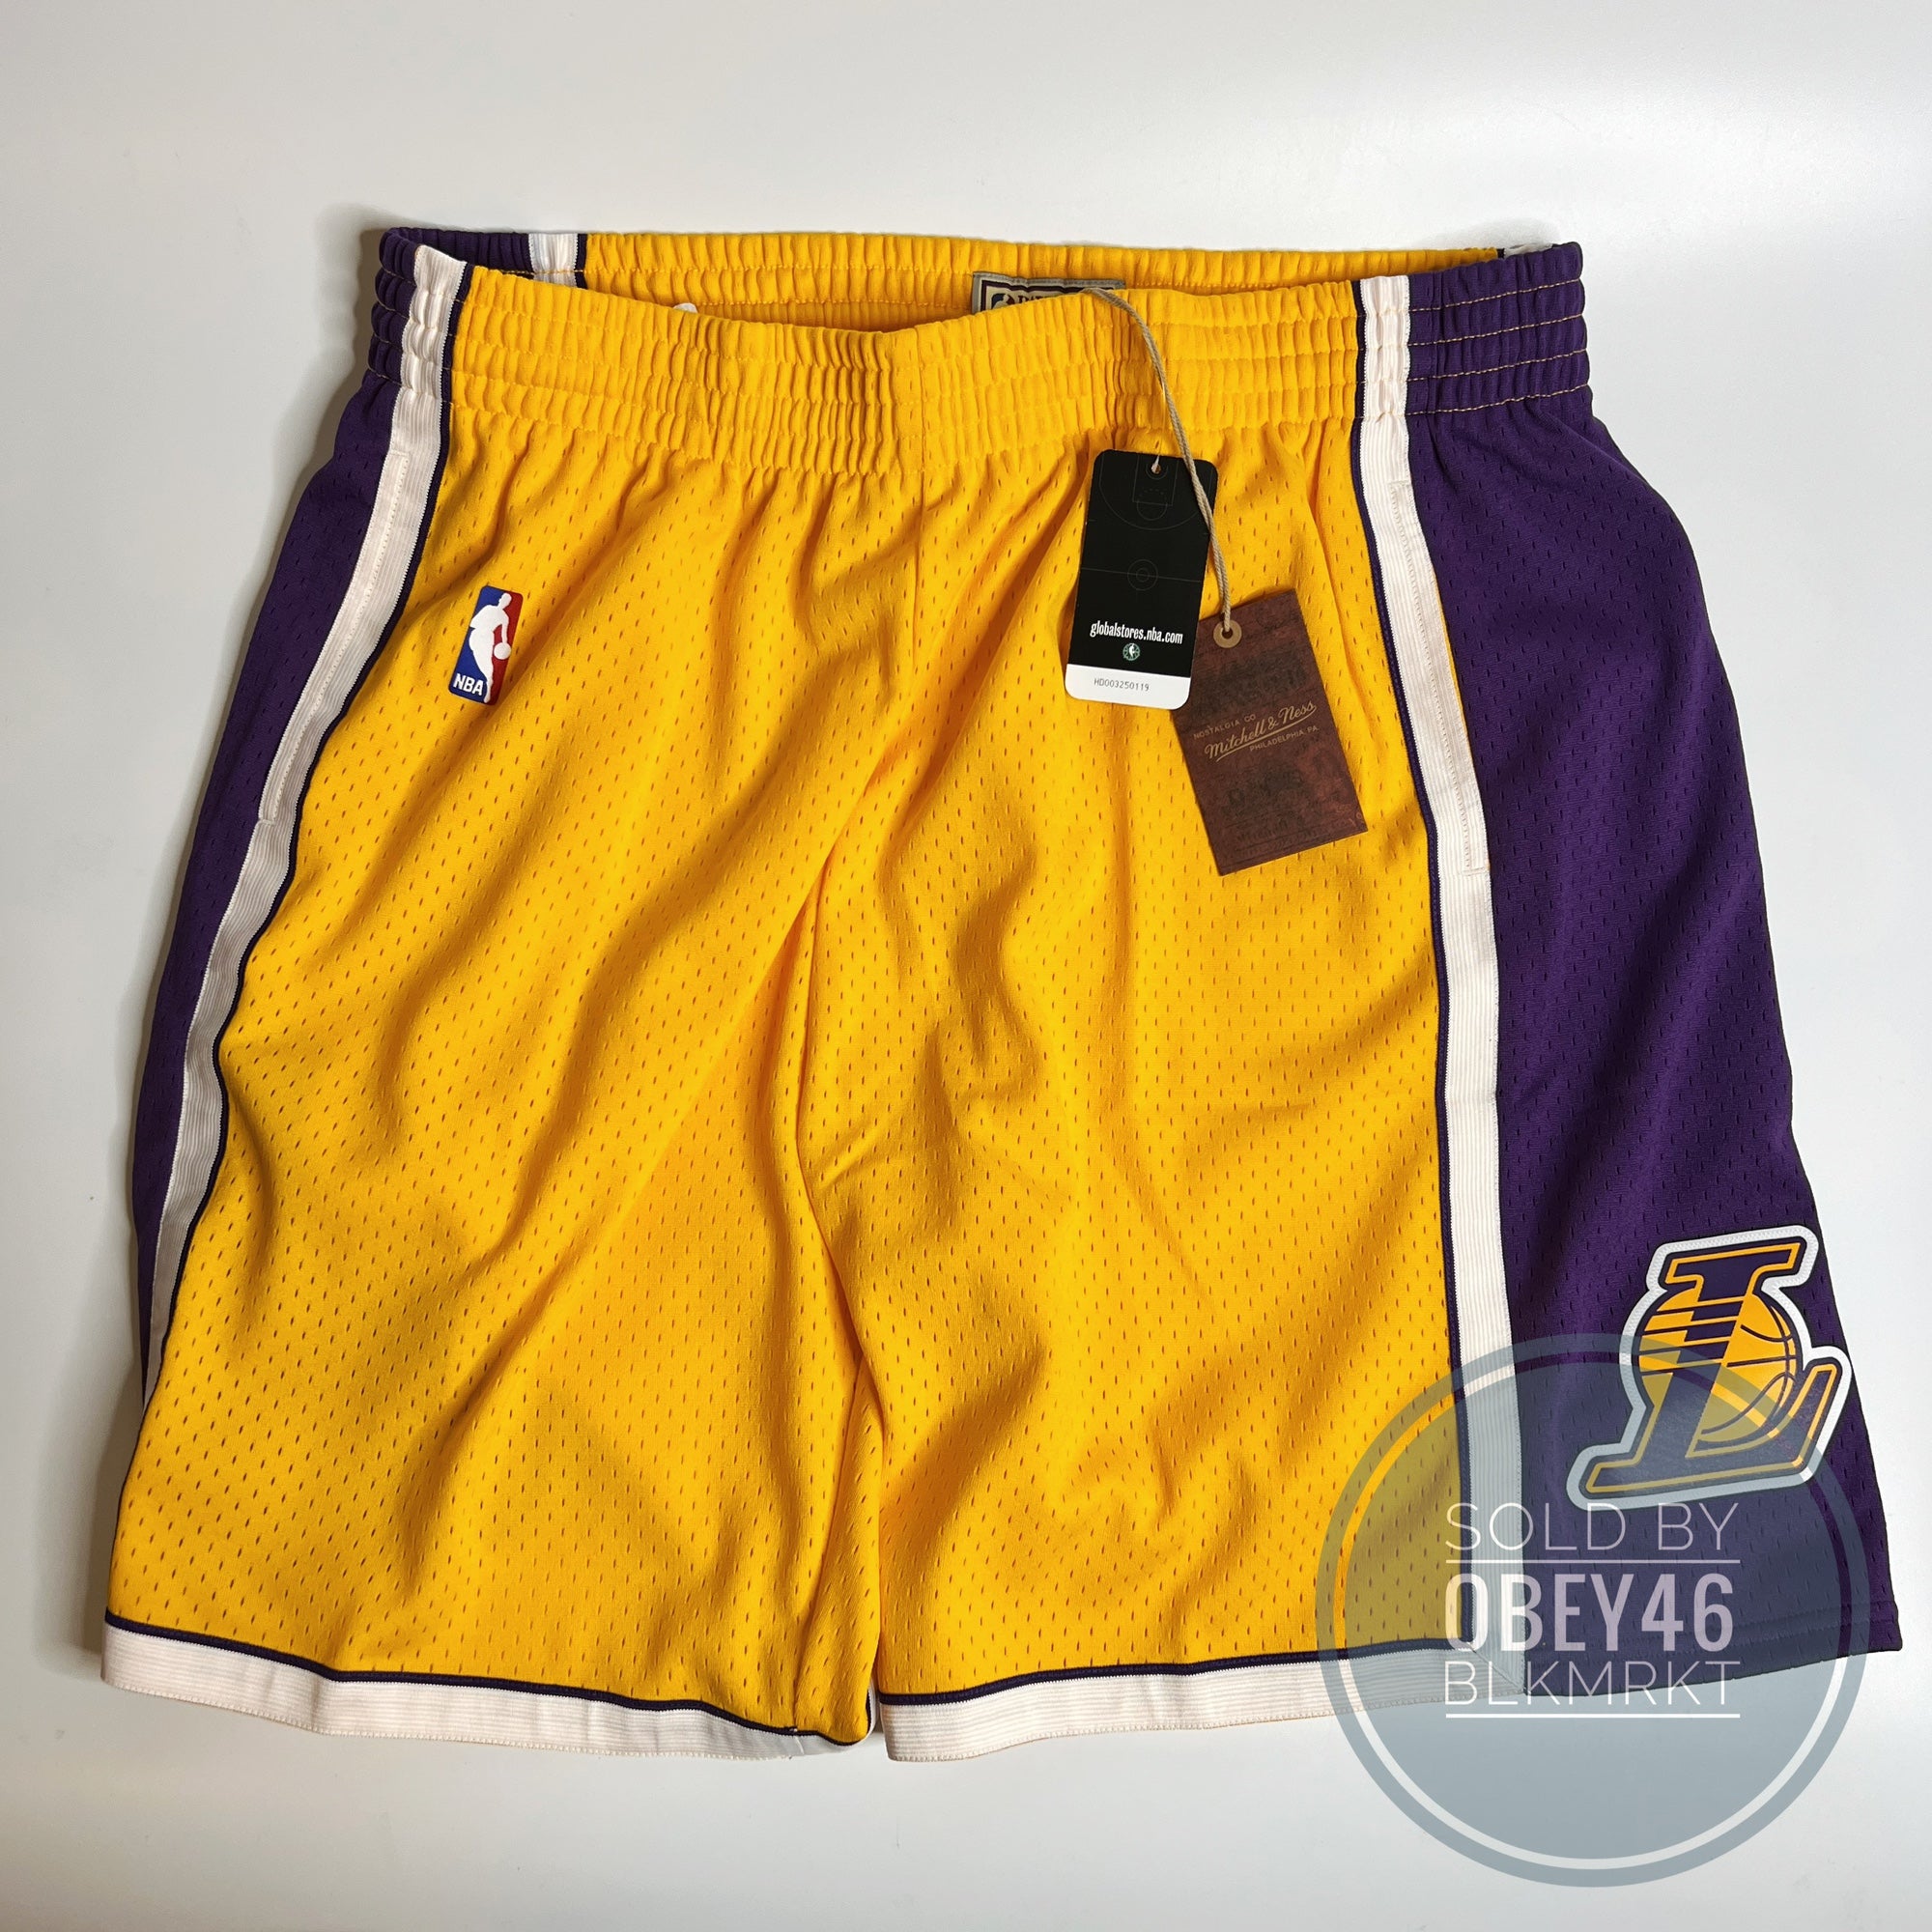 Mitchell & Ness Los Angeles Lakers Short Violet - Burned Sports